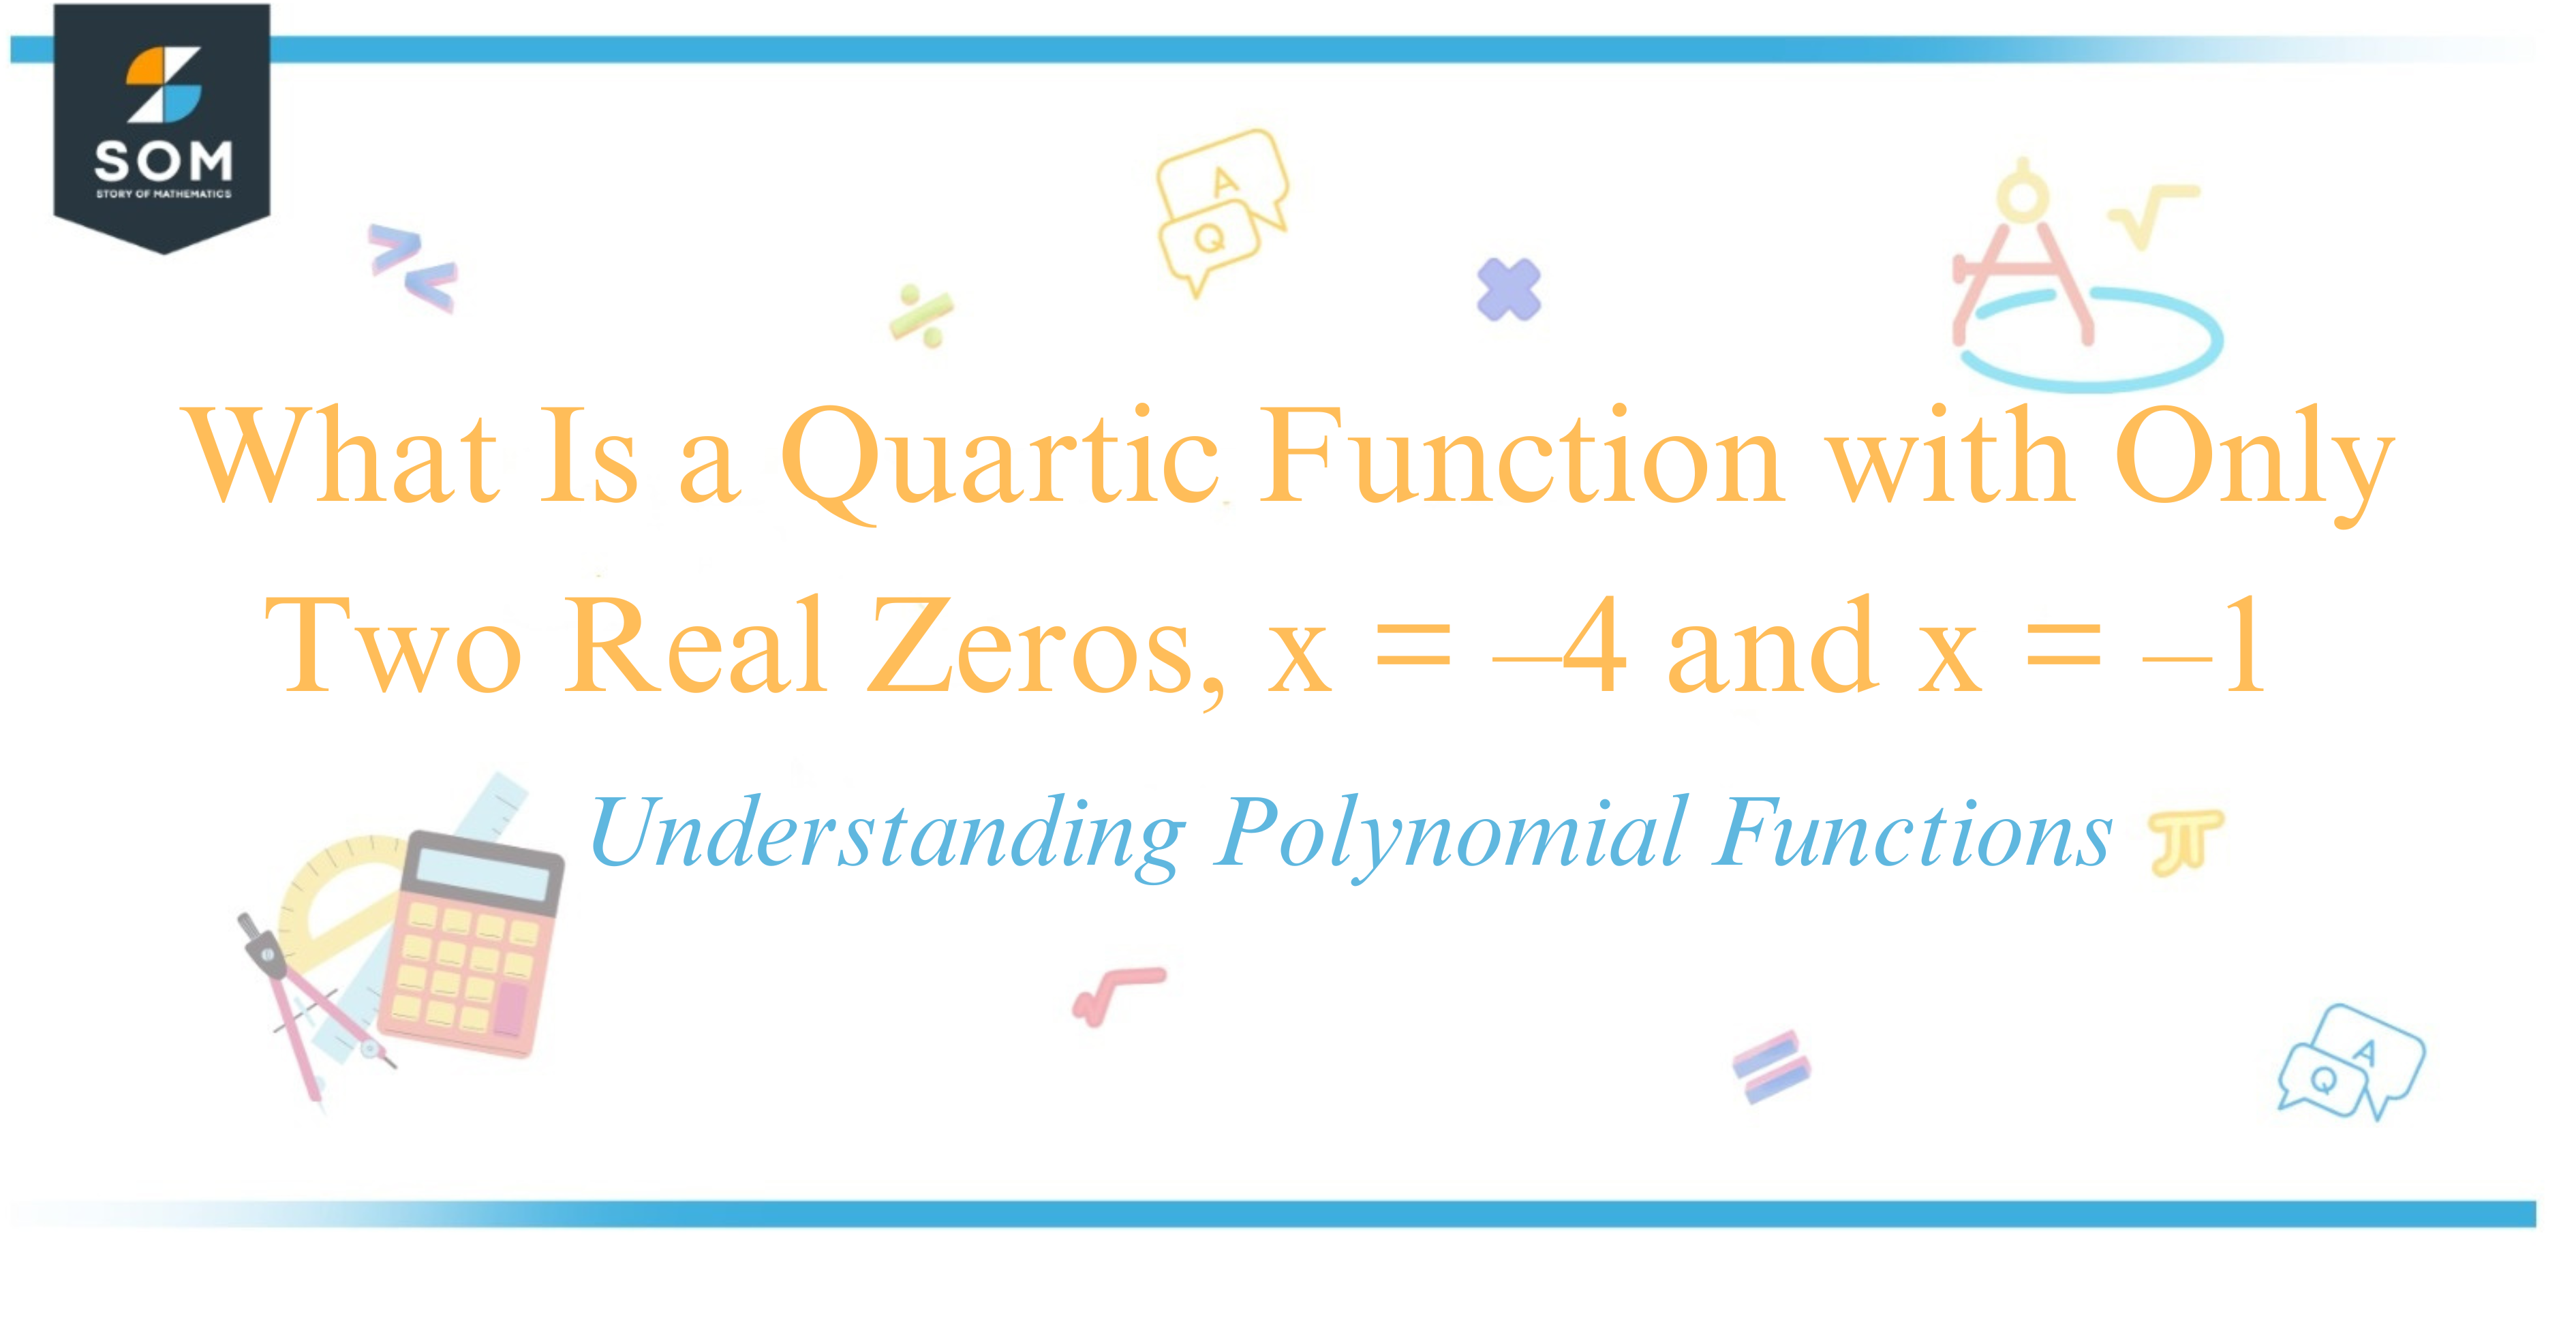 What Is a Quartic Function with Only Two Real Zeros, x = –4 and x = –1 Understanding Polynomial Functions